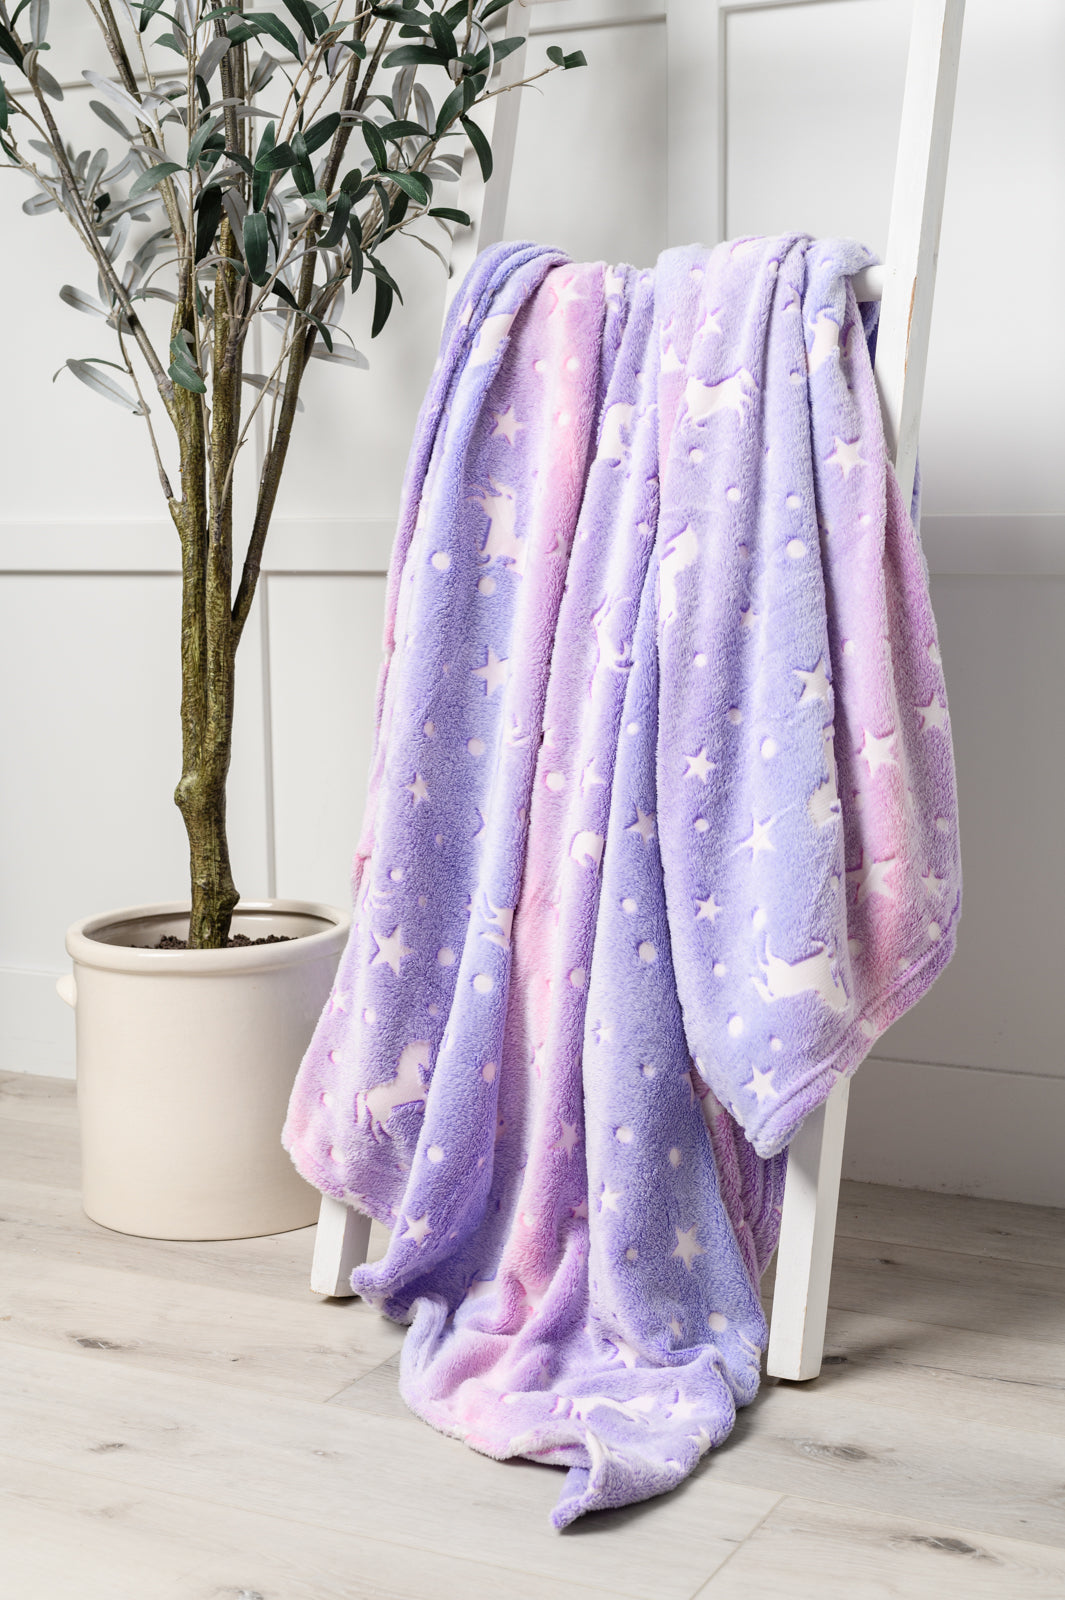 Glow in the Dark Blanket in Unicorn Rainbow-220 Beauty/Gift-Inspired by Justeen-Women's Clothing Boutique in Chicago, Illinois